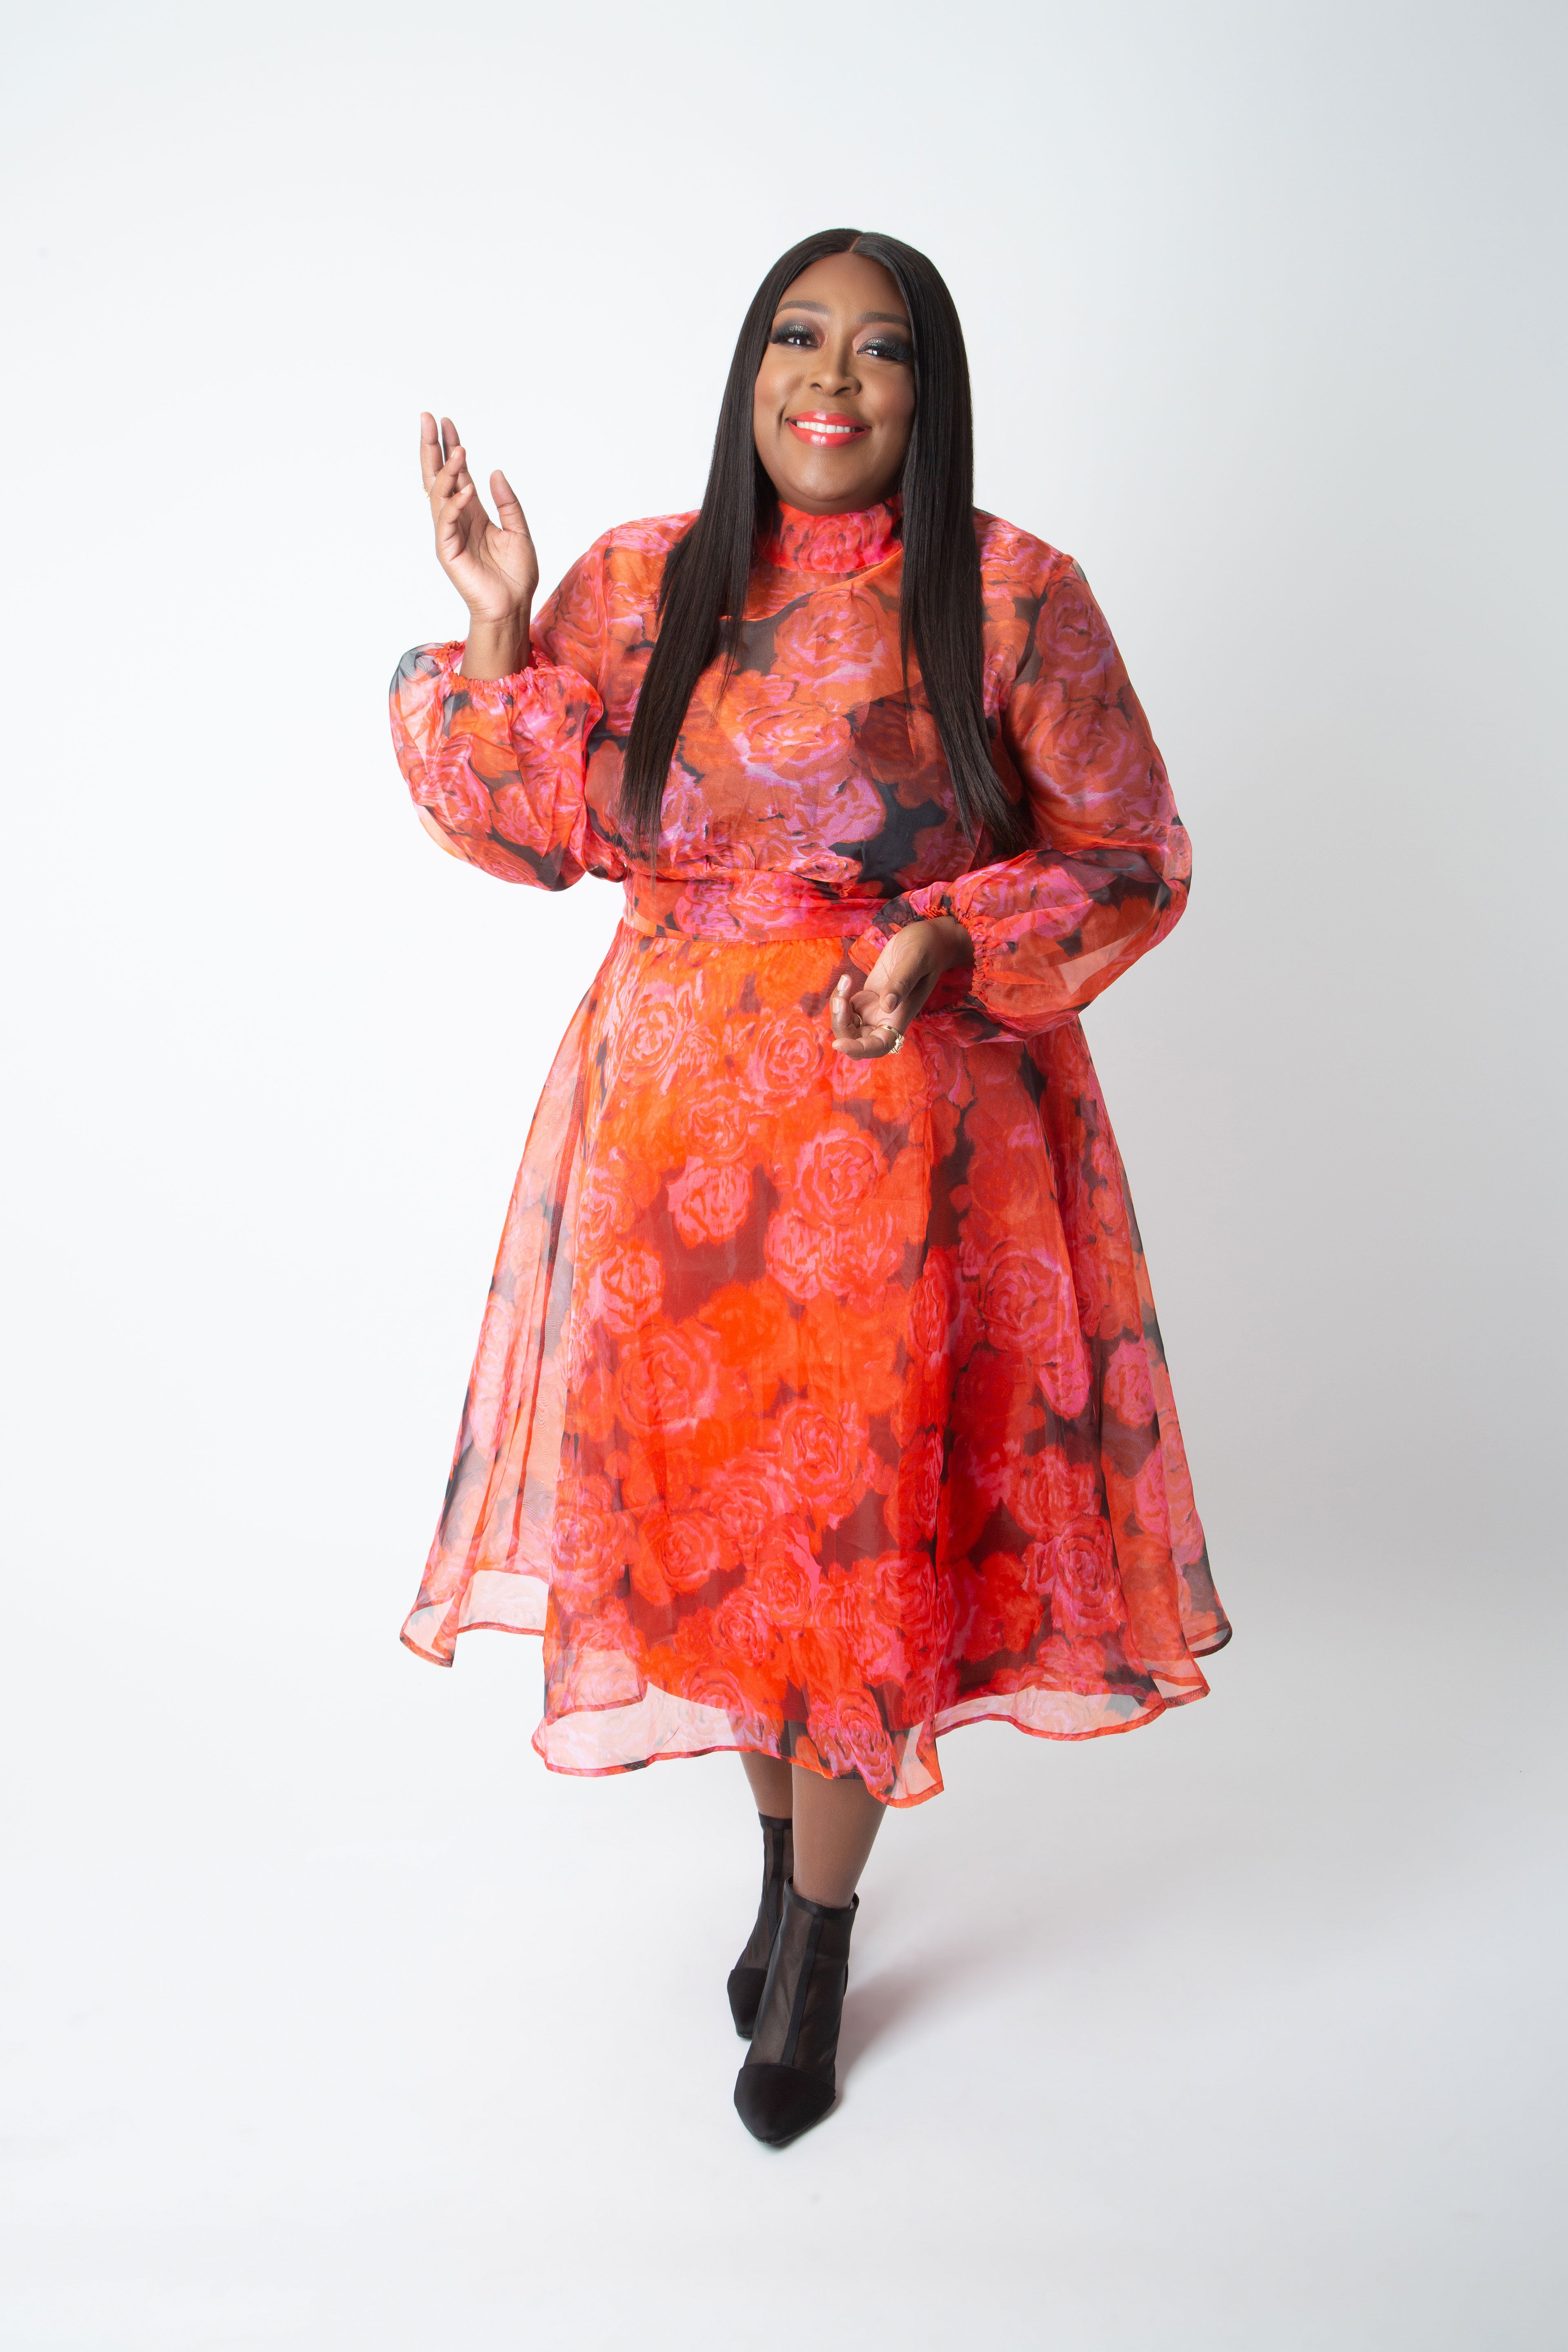 Loni Love Launches First Collection With Ashley Stewart